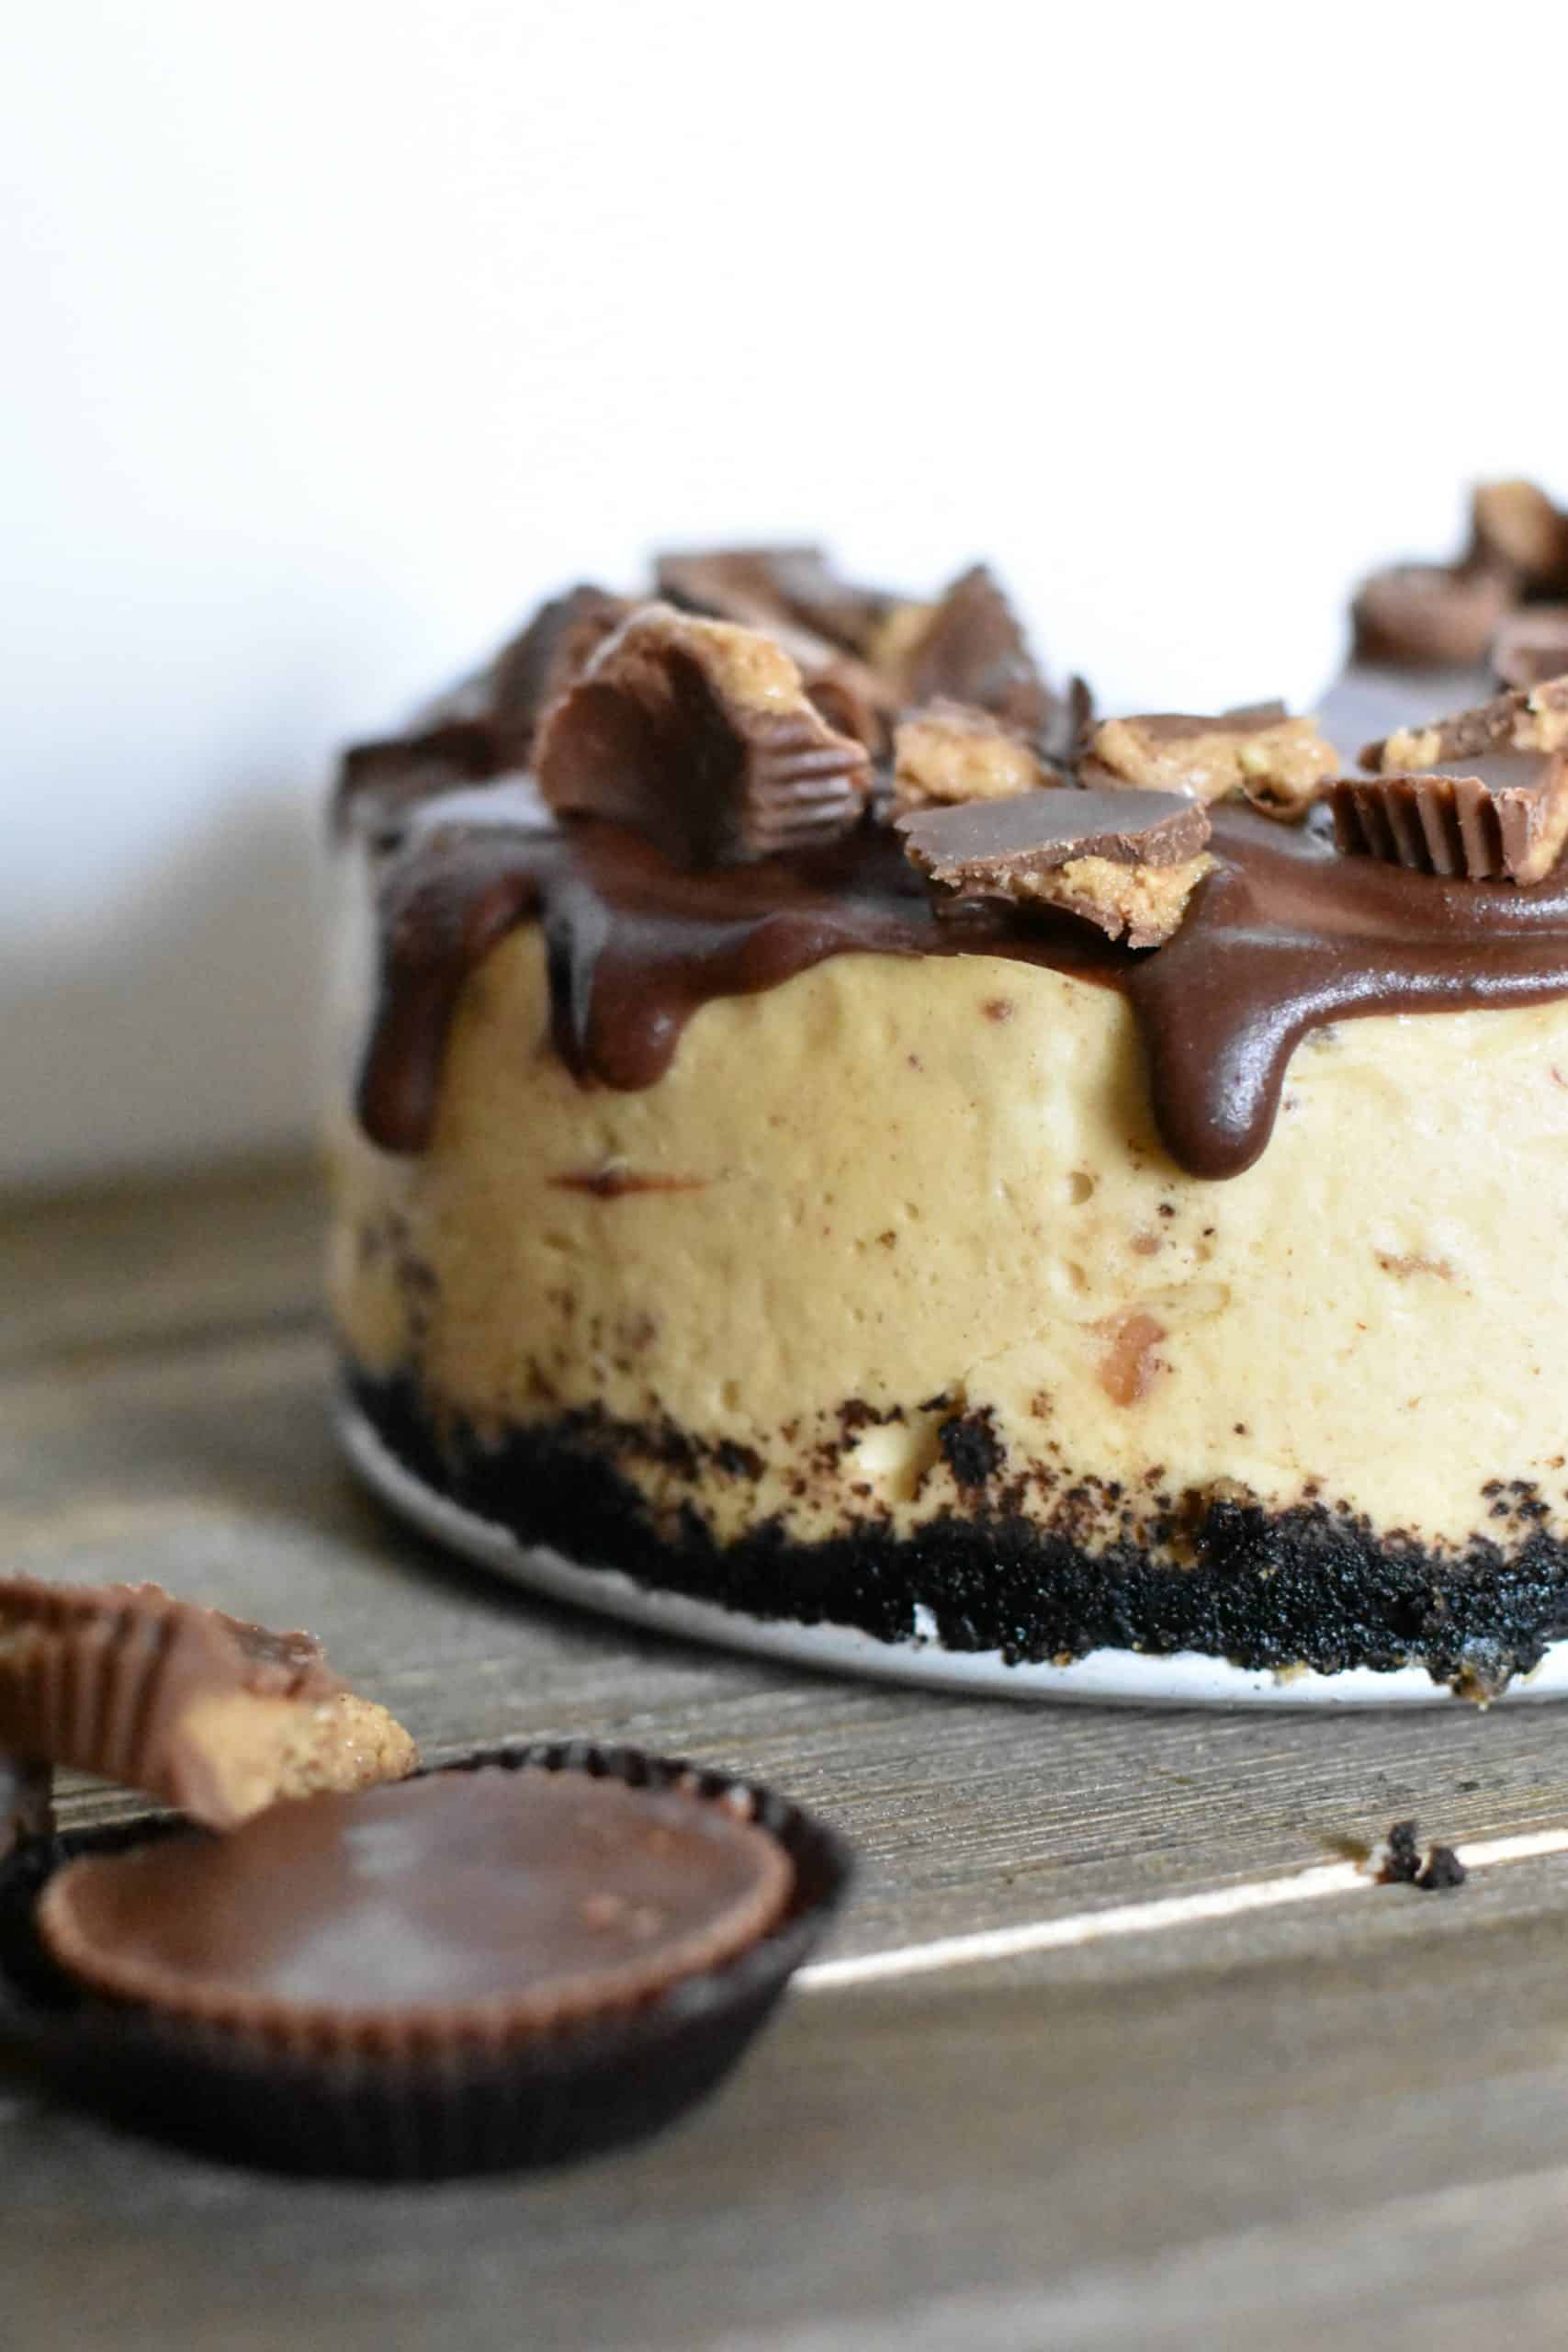 Decadent Reese’s Peanut Butter Cheesecake Recipe